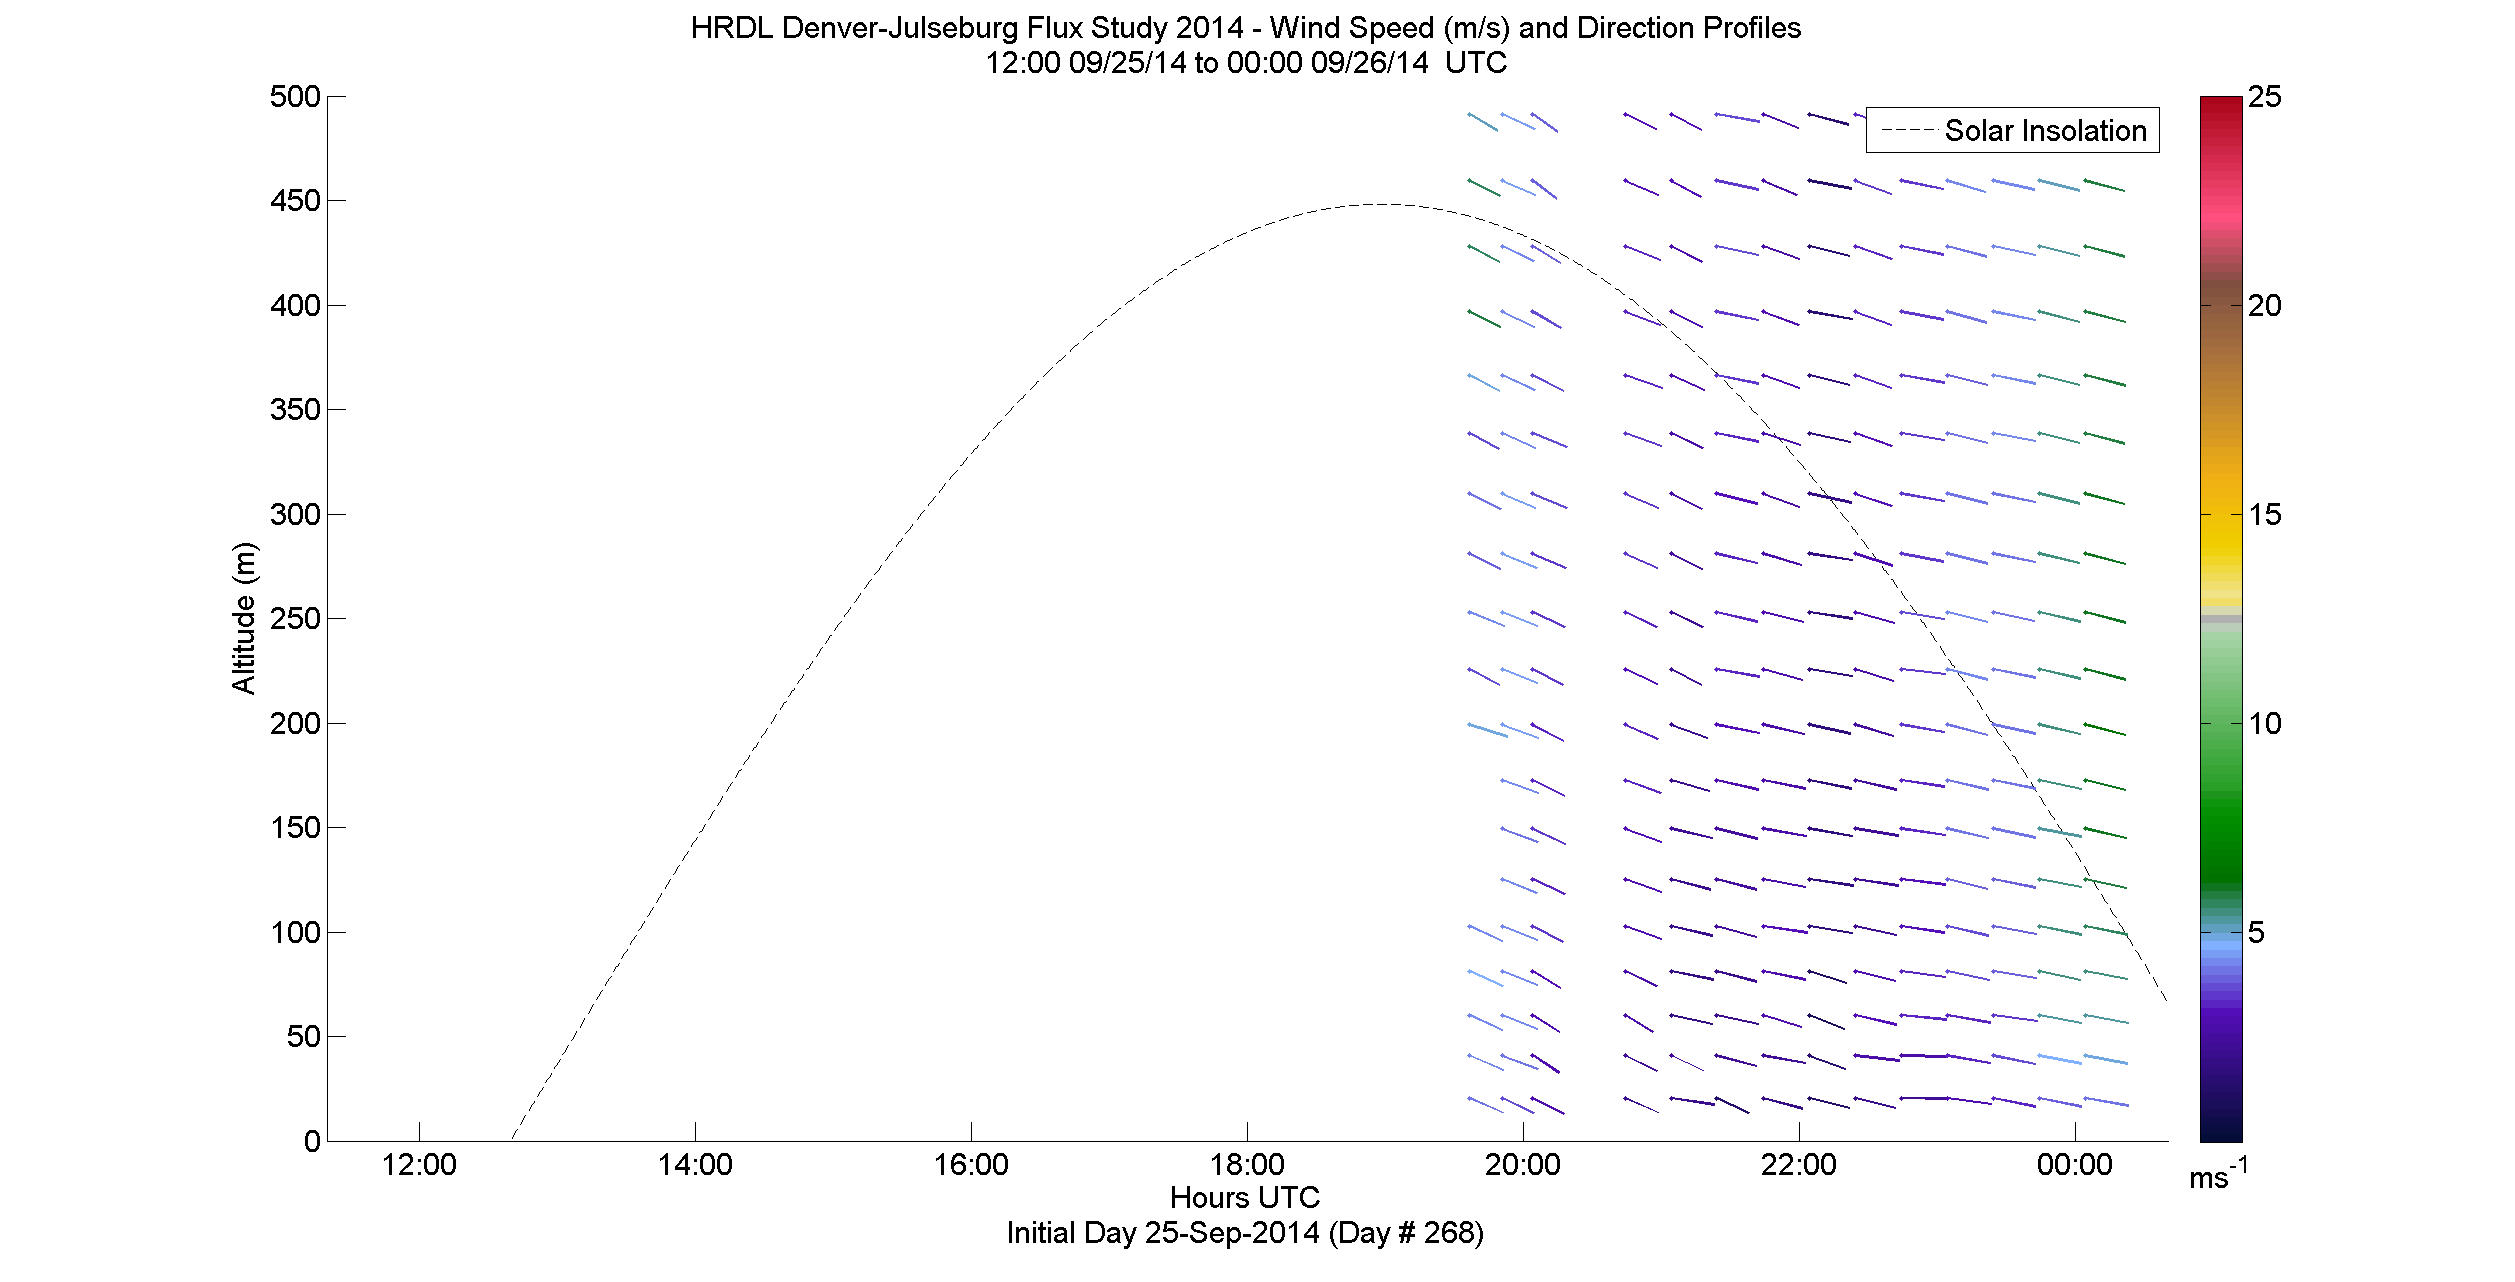 HRDL speed and direction profile - September 25 pm